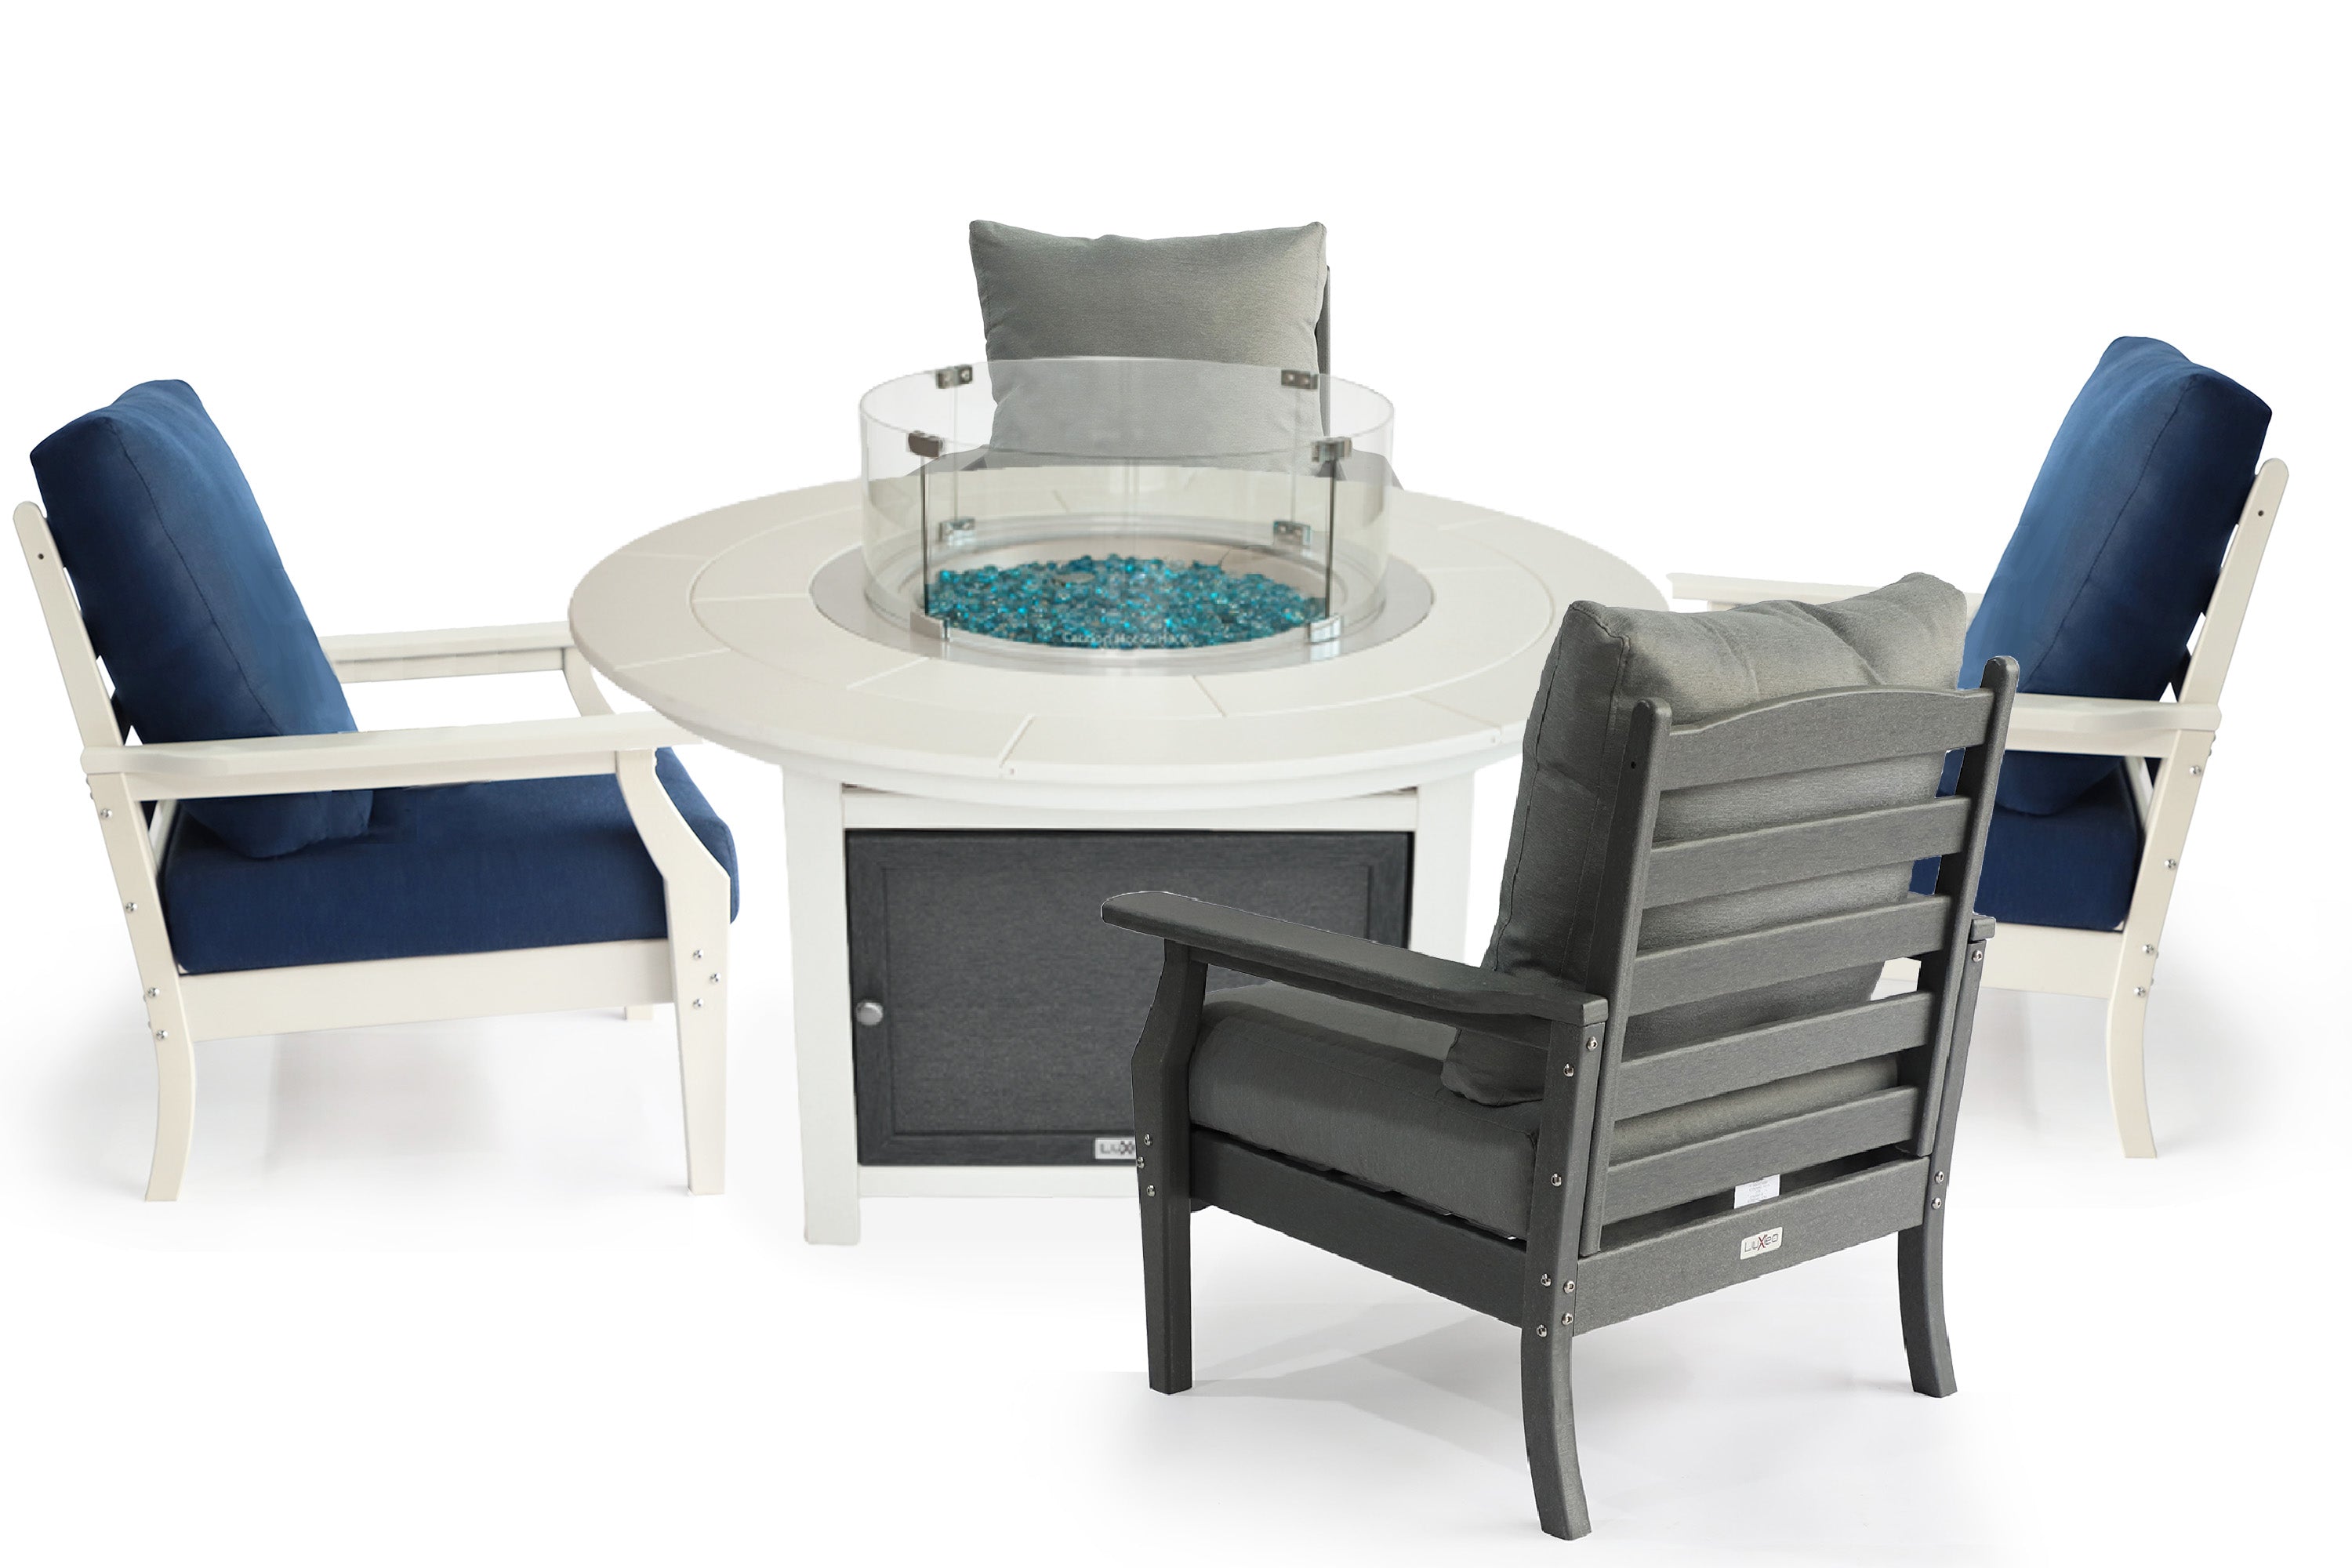 LuXeo Vail 48" Two Tone Fire Pit, Round Top with Four Aspen Chairs